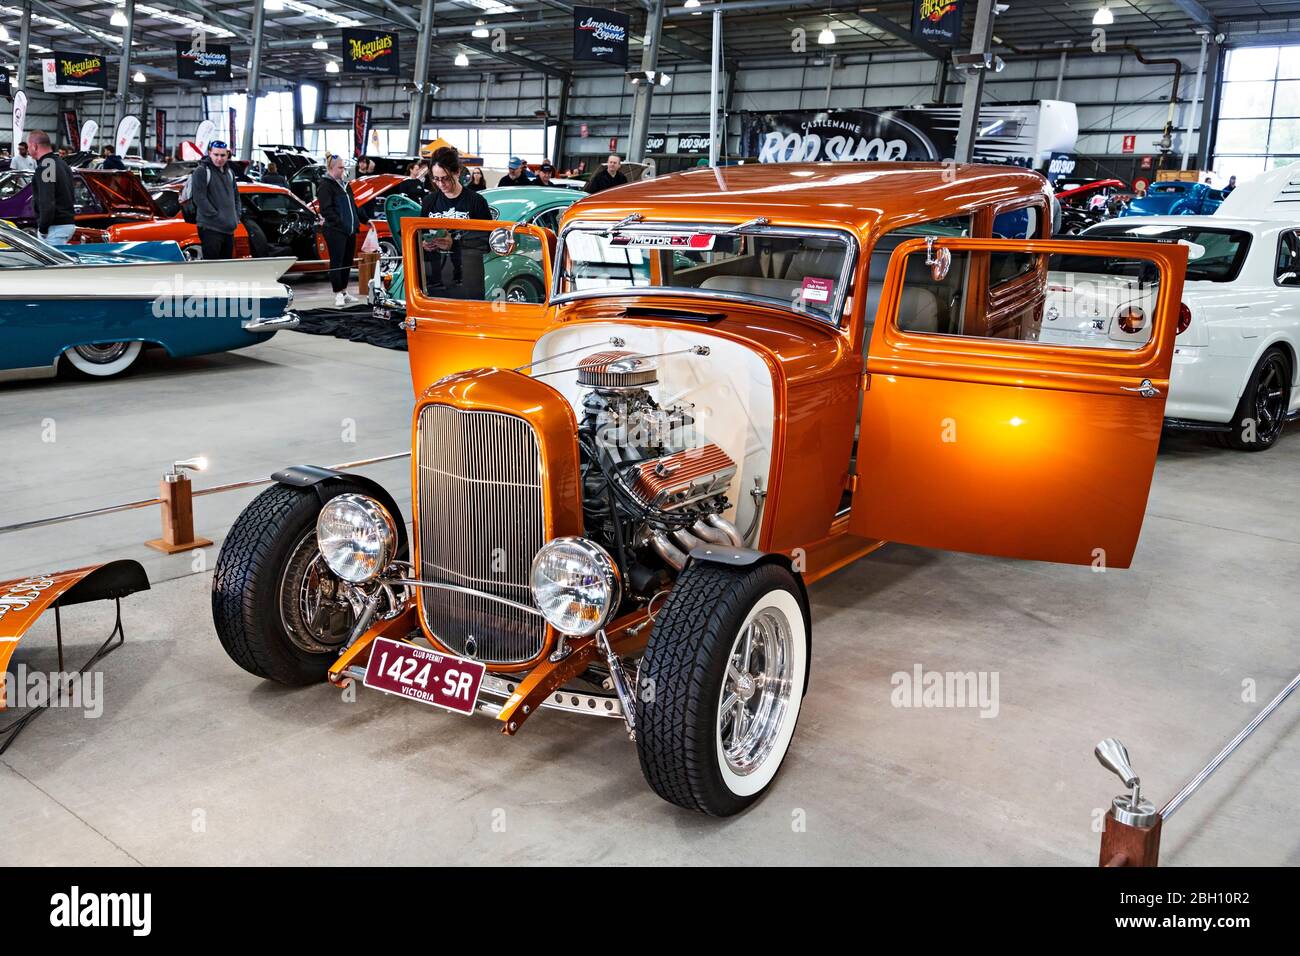 Automobiles /   Hot Rod displayed at a motor show in Melbourne Victoria Australia. Stock Photo